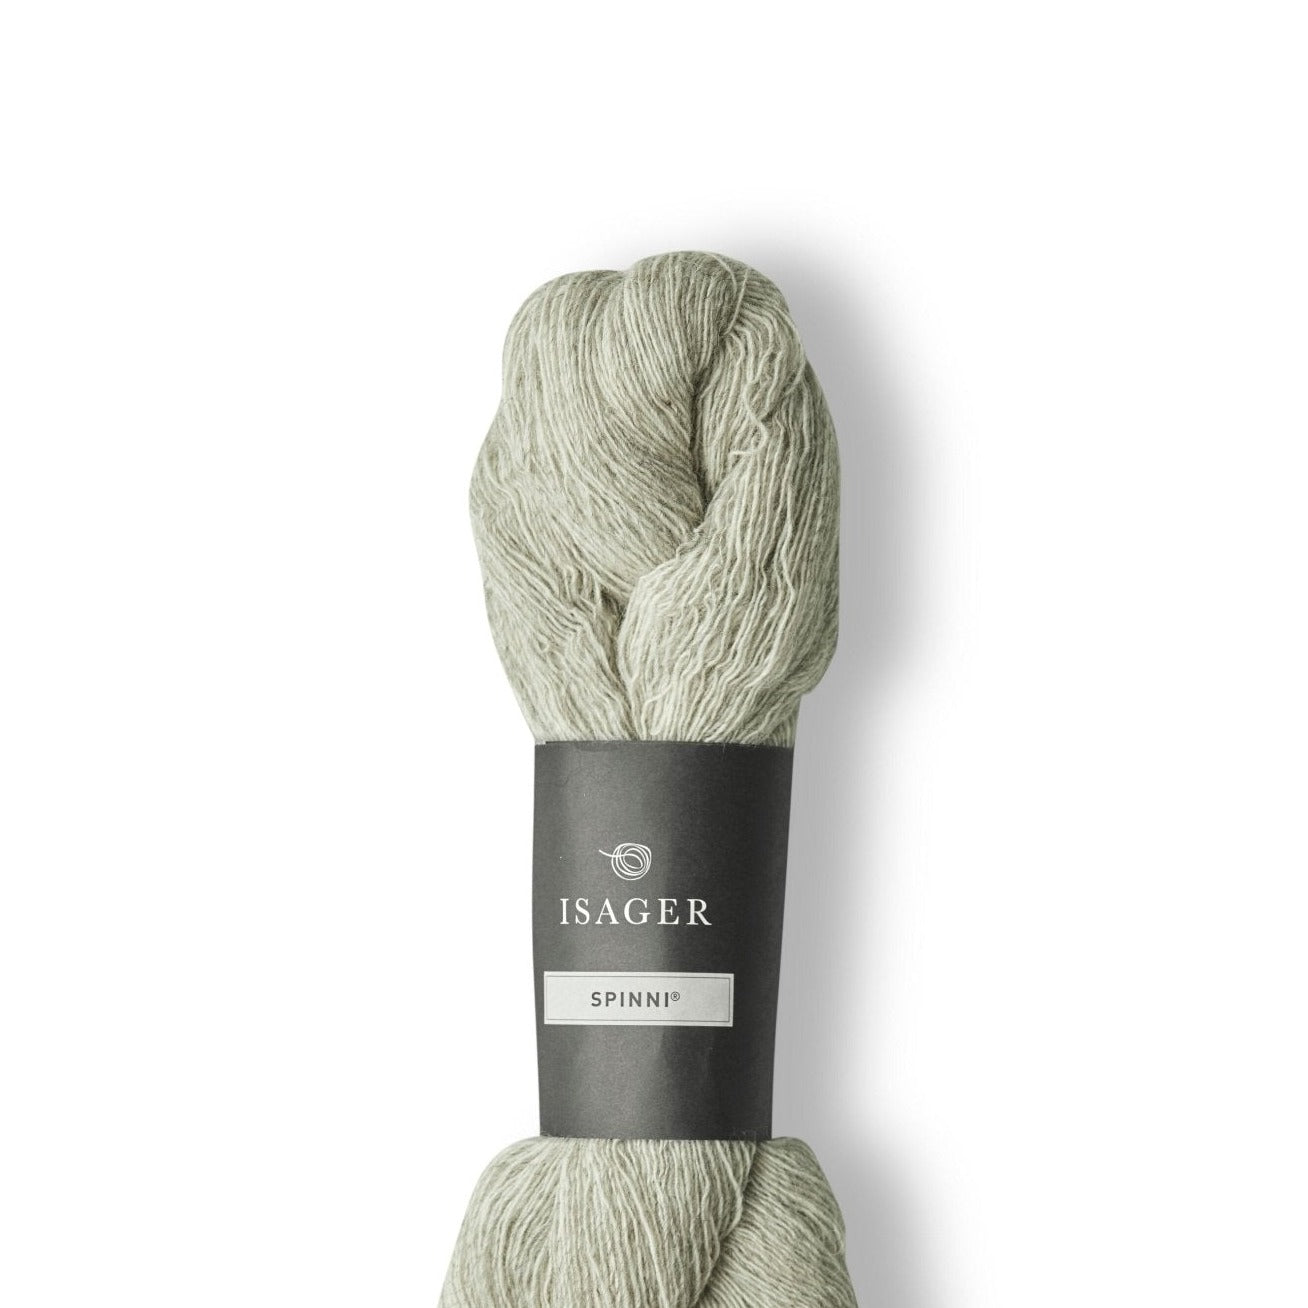 Isager Spinni - 2s - 2 Ply - Isager - The Little Yarn Store